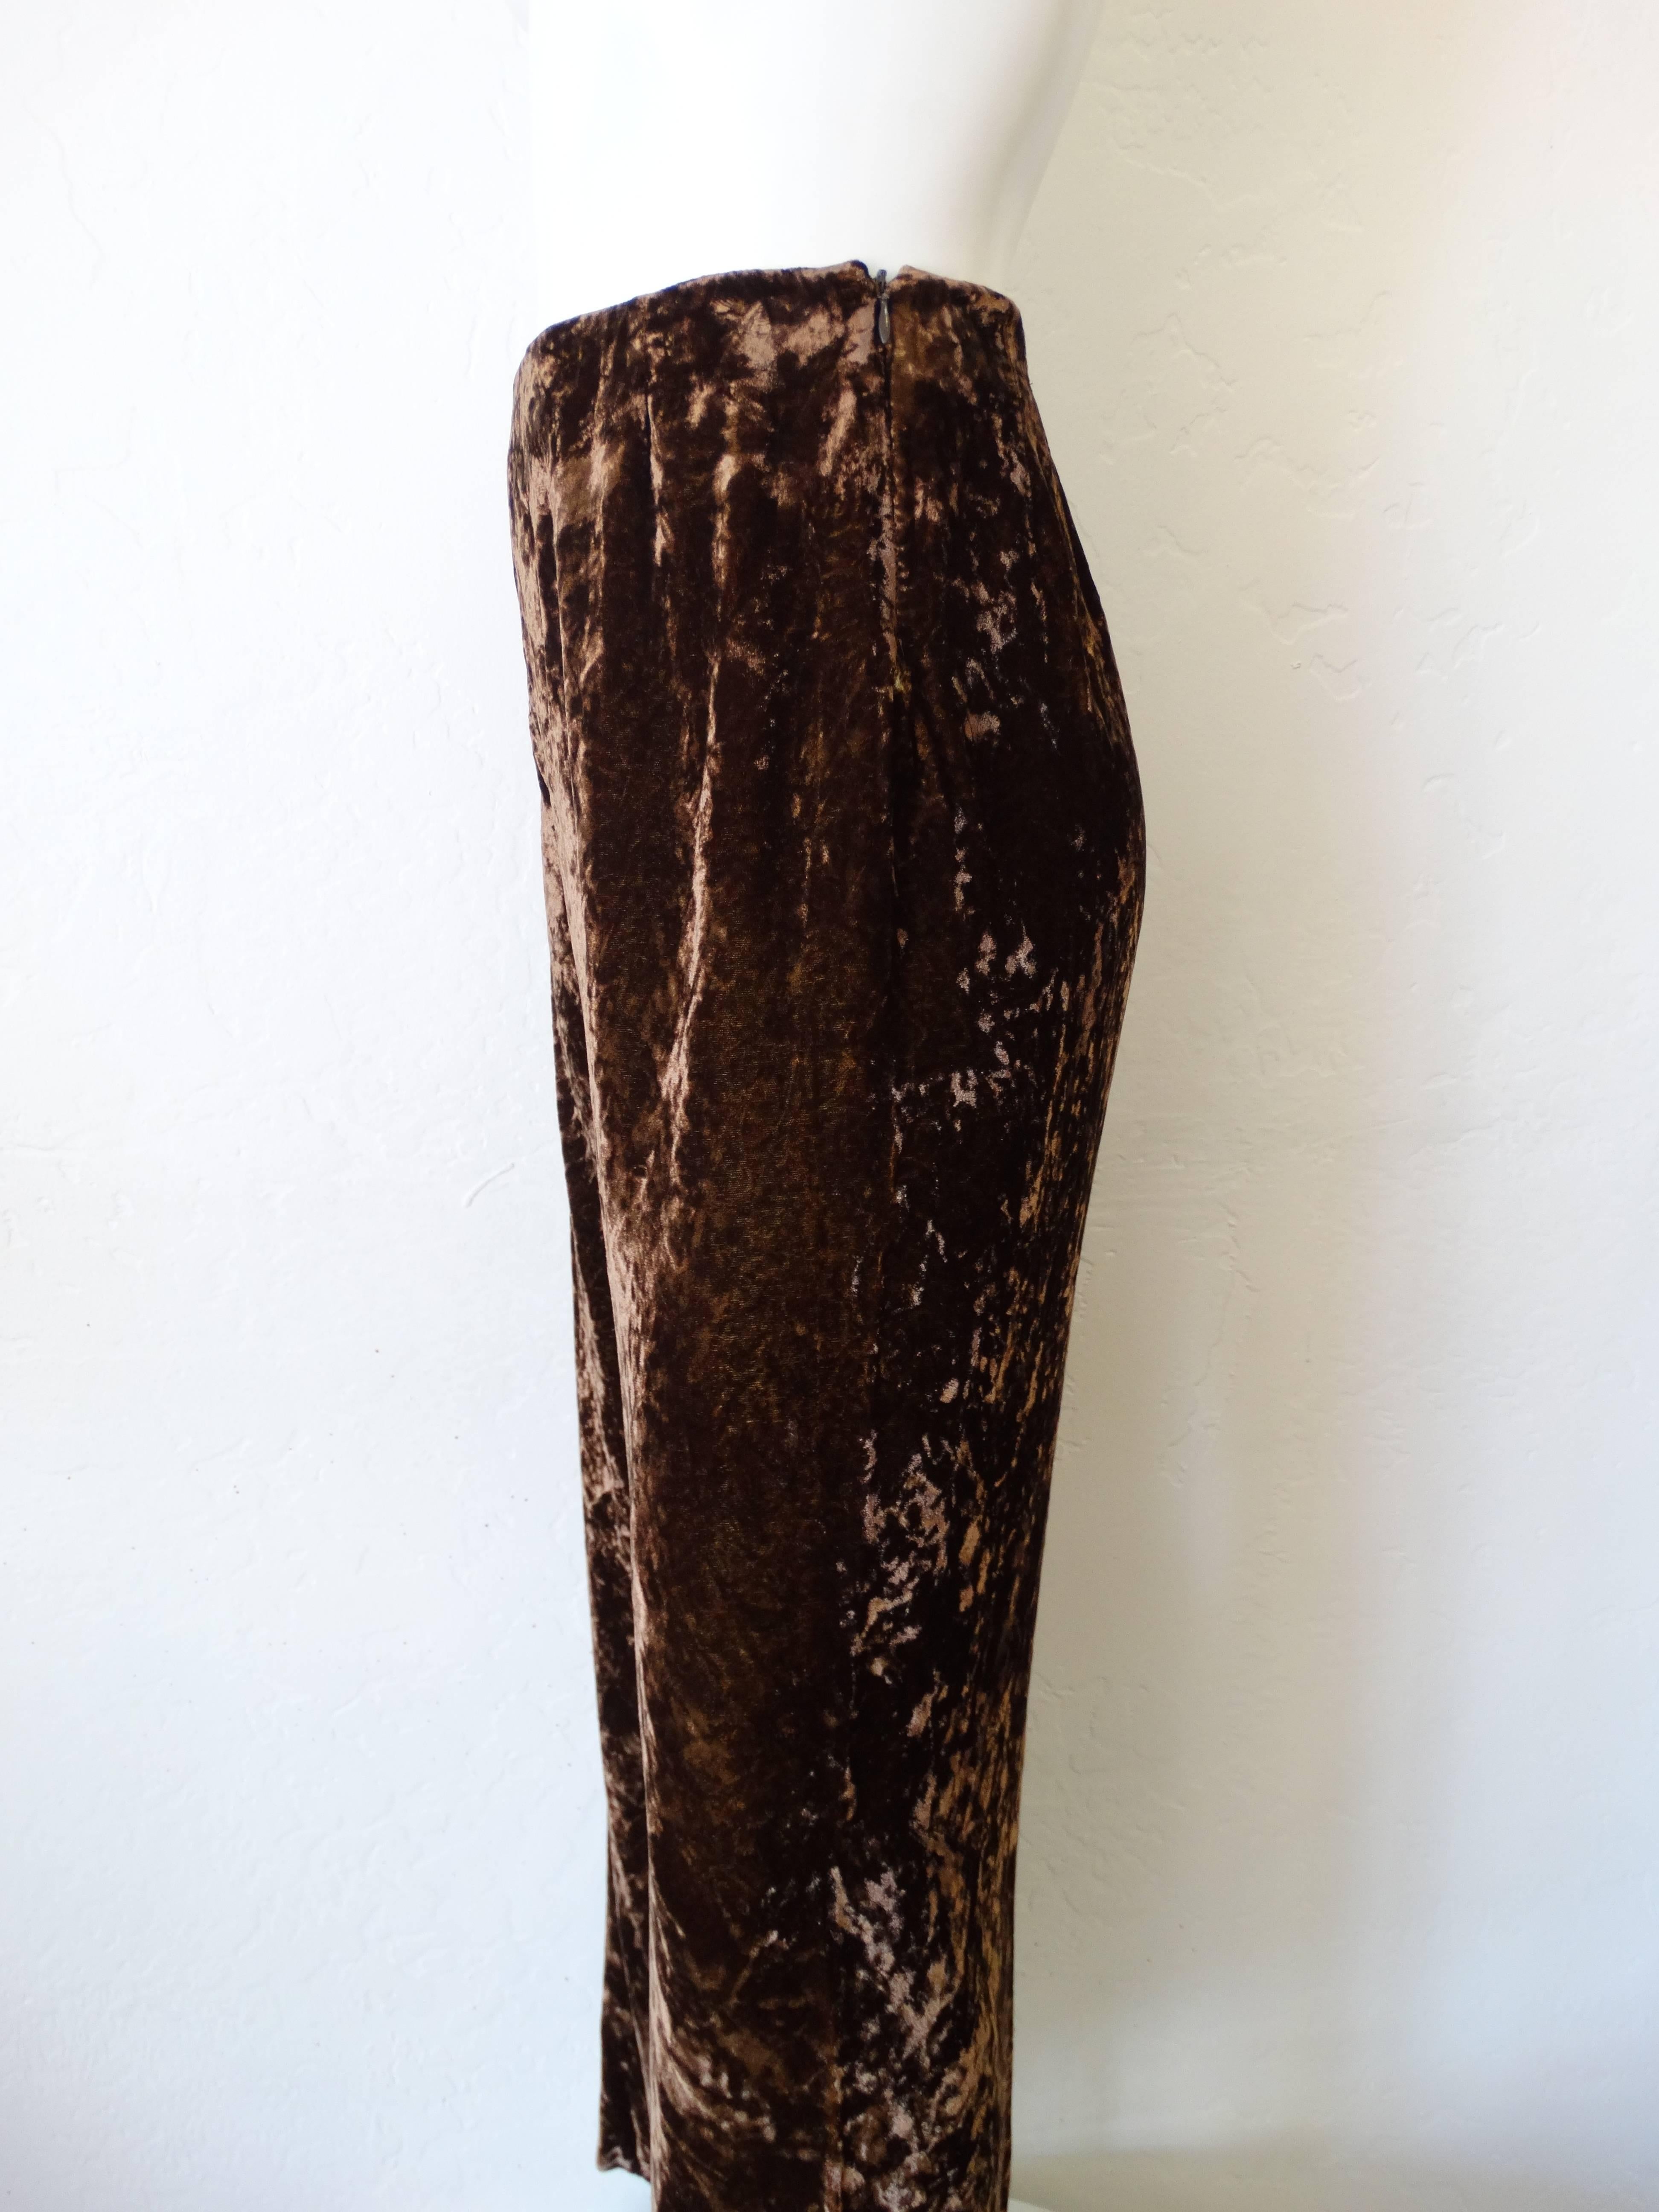 Gianfranco Ferre Crushed Brown Velvet Pants In Excellent Condition For Sale In Scottsdale, AZ